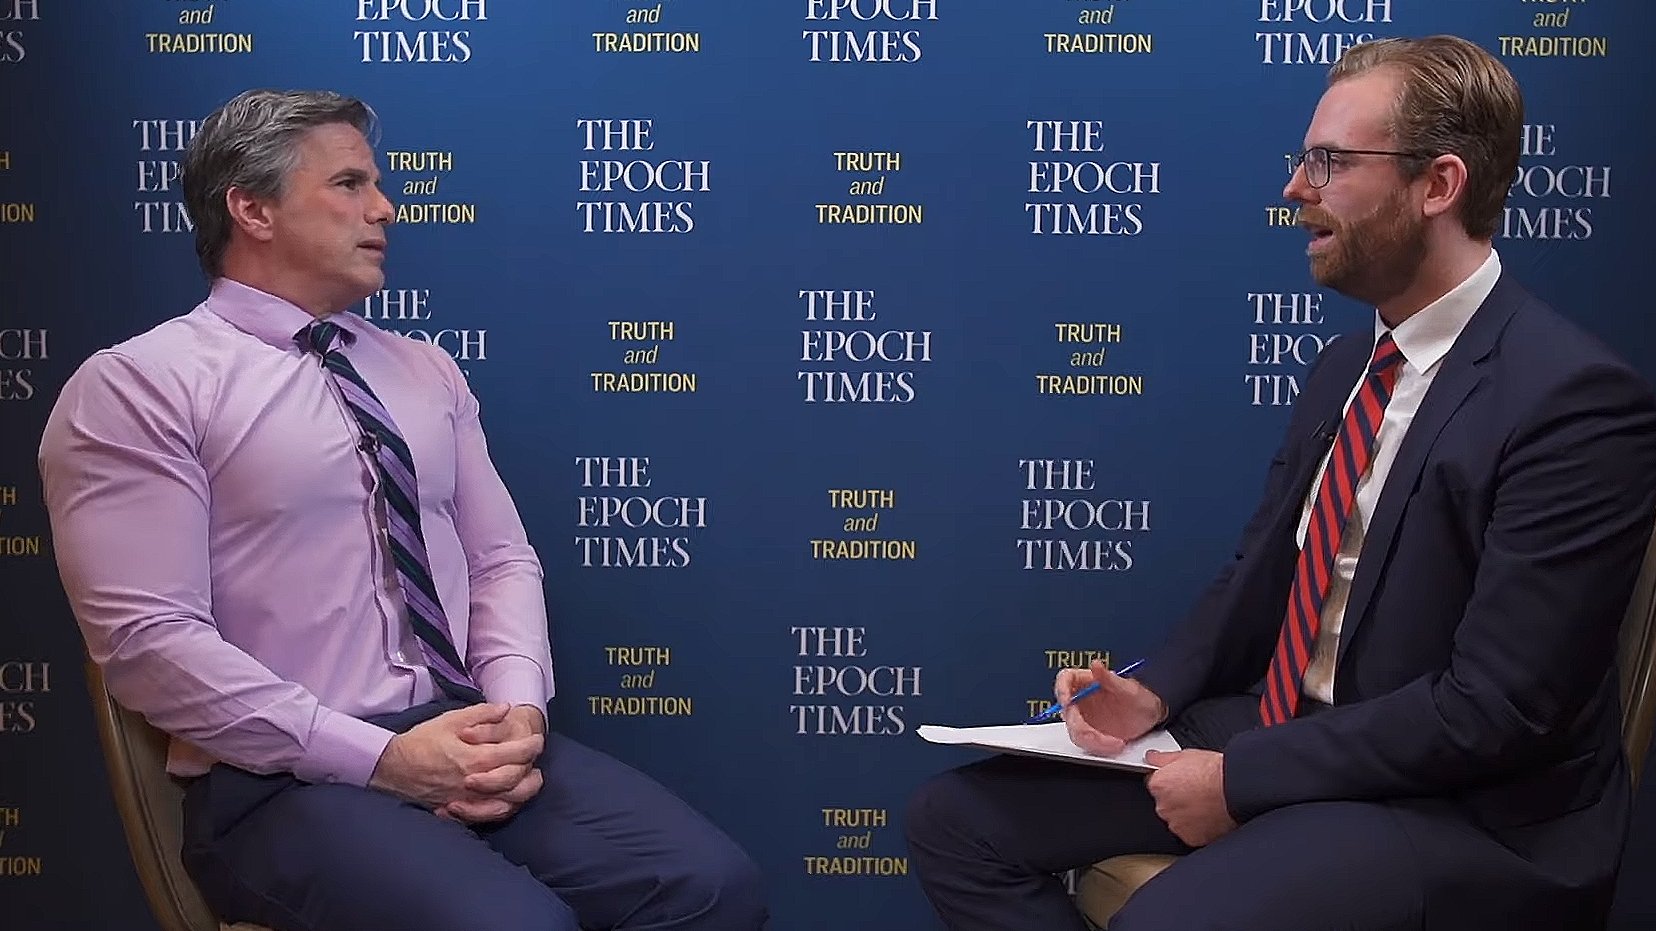 Tom Fitton on Twitter: "Of course Obama knew about #Spygate. When will he be questioned.Two great @EpochTimes interviews:https://t.co/V3ExOu13KEhttps://t.co/0Y4pxJAjPv… https://t.co/8a2s6Xru2v"